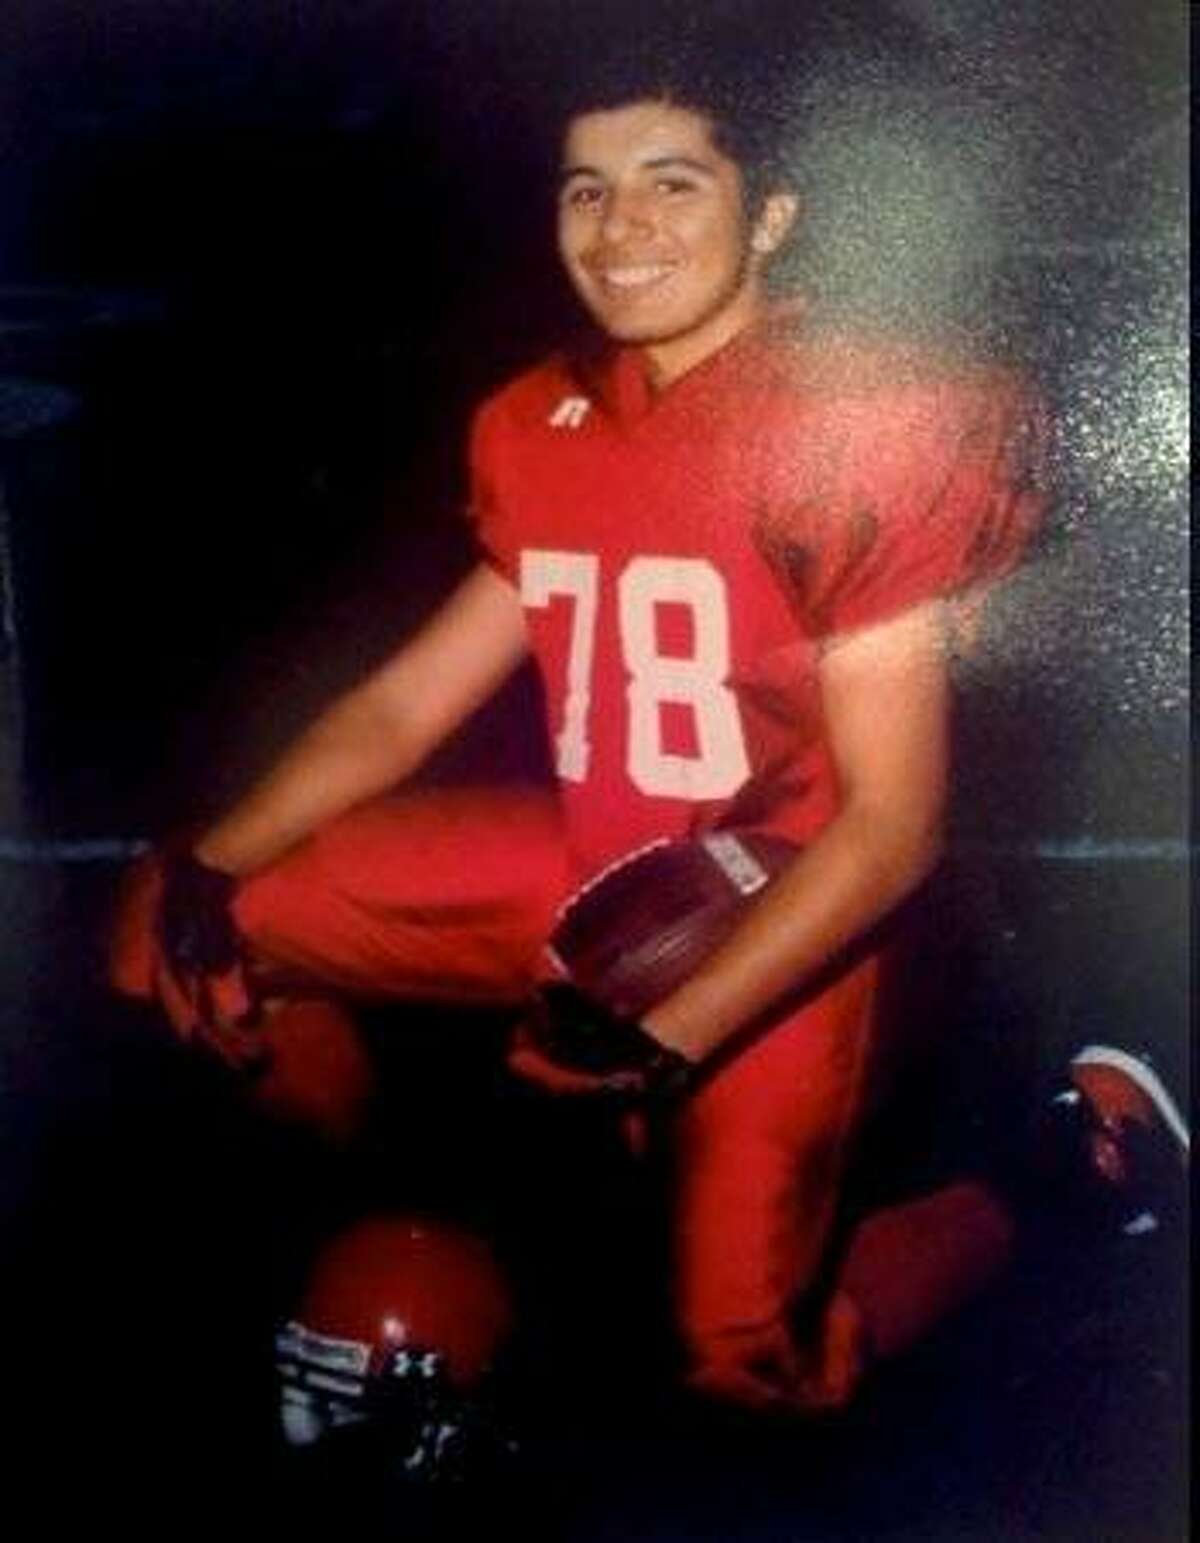 Eric Toscano, who played football at Skyline High School in Oakland and was shot to death at his 18th birthday party.